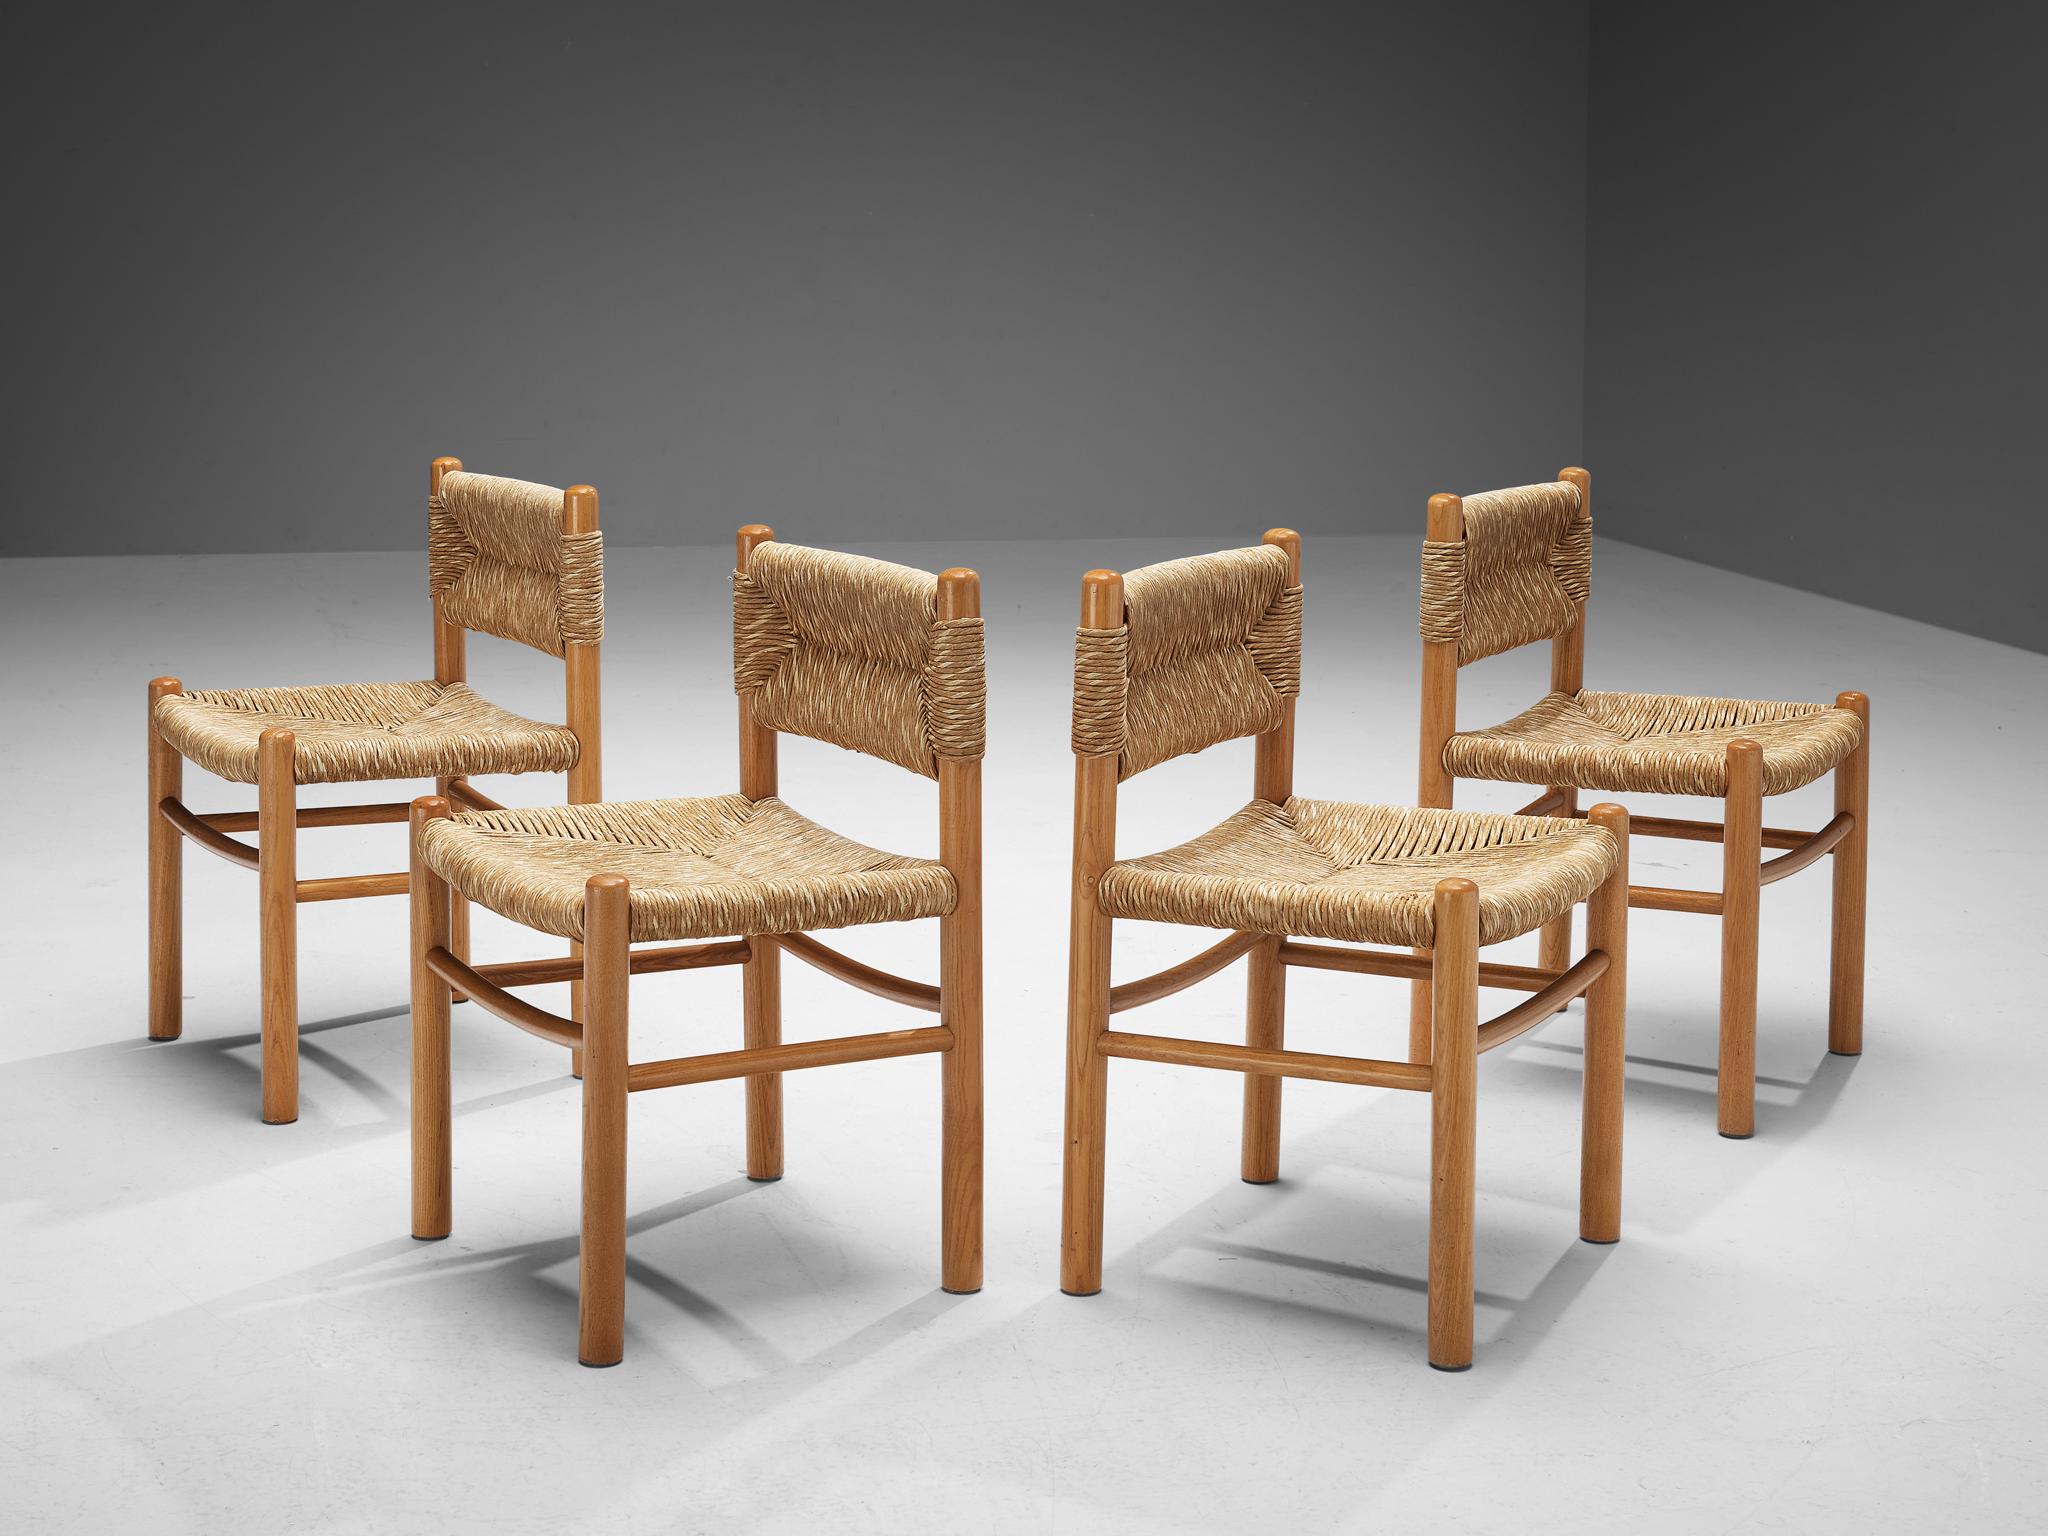 Set of four dining chairs, ash, straw, France, 1960s.

This set of four dining chairs features a solid wooden frame, consisting of cylindrical thick legs that are connected to each other with elegant slim horizontal slats. The seats and backrests